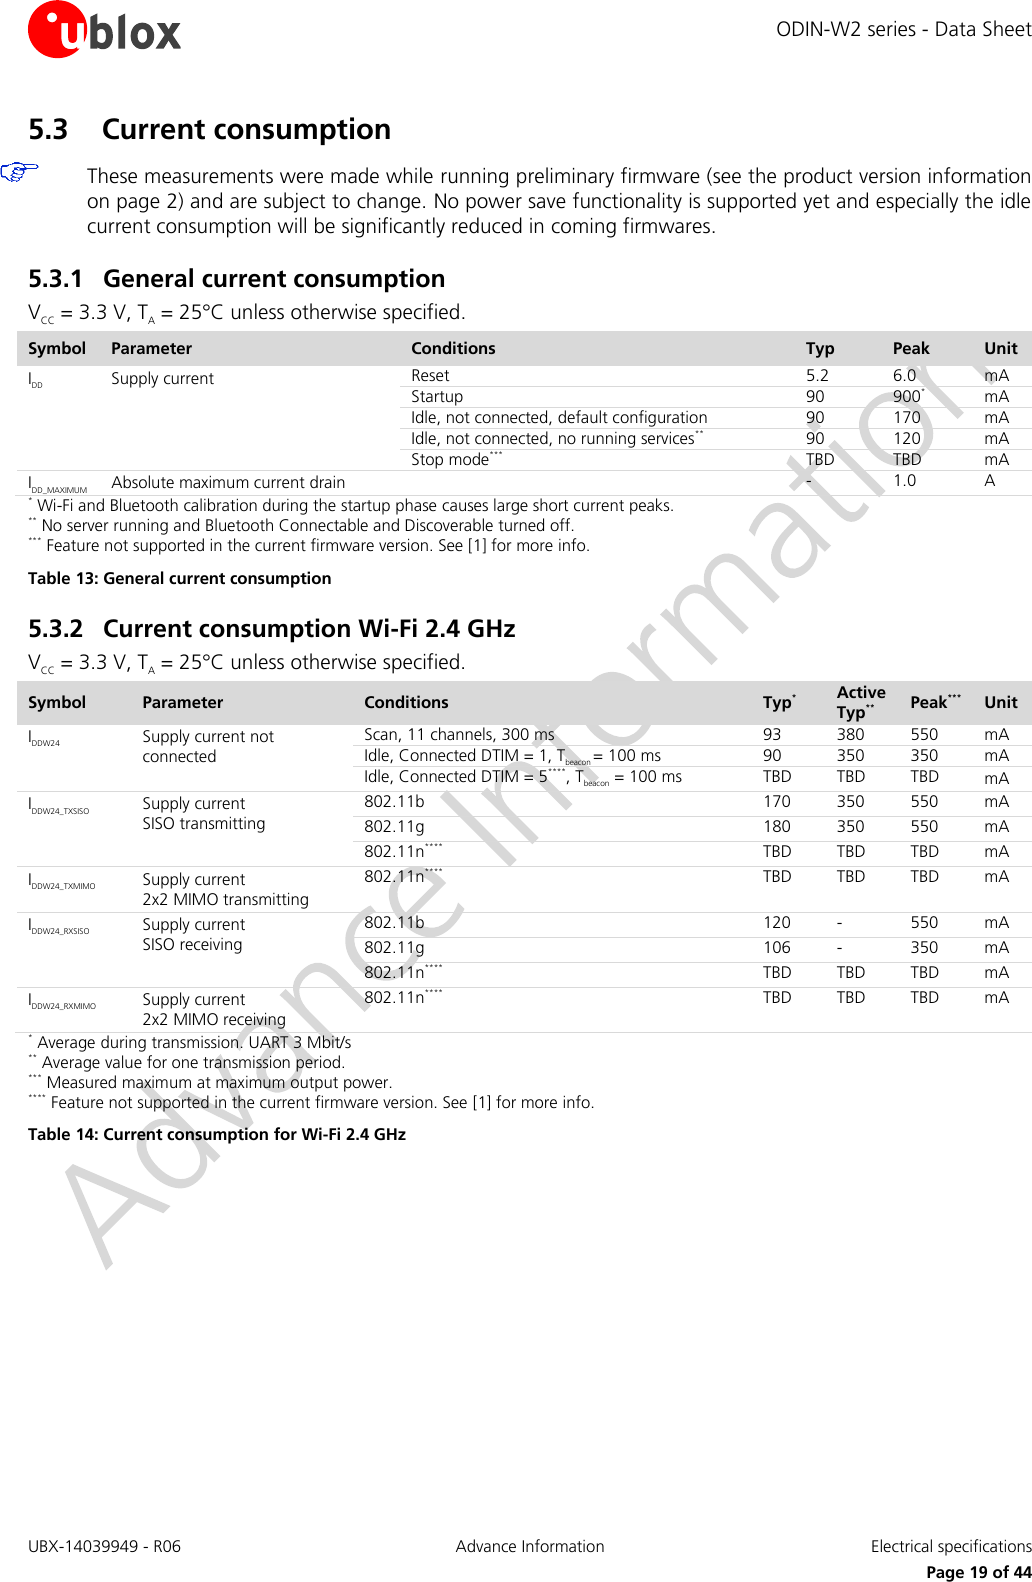 ODIN-W2 series - Data Sheet UBX-14039949 - R06 Advance Information  Electrical specifications     Page 19 of 44 5.3 Current consumption  These measurements were made while running preliminary firmware (see the product version information on page 2) and are subject to change. No power save functionality is supported yet and especially the idle current consumption will be significantly reduced in coming firmwares. 5.3.1 General current consumption VCC = 3.3 V, TA = 25°C unless otherwise specified. Symbol Parameter Conditions Typ Peak Unit IDD Supply current Reset 5.2 6.0 mA Startup 90 900* mA Idle, not connected, default configuration 90 170 mA Idle, not connected, no running services** 90 120 mA Stop mode*** TBD TBD mA IDD_MAXIMUM Absolute maximum current drain   - 1.0 A * Wi-Fi and Bluetooth calibration during the startup phase causes large short current peaks. ** No server running and Bluetooth Connectable and Discoverable turned off. *** Feature not supported in the current firmware version. See [1] for more info. Table 13: General current consumption 5.3.2 Current consumption Wi-Fi 2.4 GHz VCC = 3.3 V, TA = 25°C unless otherwise specified. Symbol Parameter Conditions Typ* Active Typ** Peak*** Unit IDDW24 Supply current not connected Scan, 11 channels, 300 ms 93 380 550 mA Idle, Connected DTIM = 1, Tbeacon = 100 ms 90 350 350 mA Idle, Connected DTIM = 5****, Tbeacon = 100 ms TBD TBD TBD mA IDDW24_TXSISO Supply current  SISO transmitting 802.11b 170 350 550 mA  802.11g 180 350 550 mA  802.11n**** TBD TBD TBD mA IDDW24_TXMIMO Supply current  2x2 MIMO transmitting 802.11n**** TBD TBD TBD mA IDDW24_RXSISO Supply current  SISO receiving 802.11b 120 - 550 mA  802.11g 106 - 350 mA  802.11n**** TBD TBD TBD mA IDDW24_RXMIMO Supply current  2x2 MIMO receiving 802.11n**** TBD TBD TBD mA * Average during transmission. UART 3 Mbit/s ** Average value for one transmission period. *** Measured maximum at maximum output power. **** Feature not supported in the current firmware version. See [1] for more info. Table 14: Current consumption for Wi-Fi 2.4 GHz    